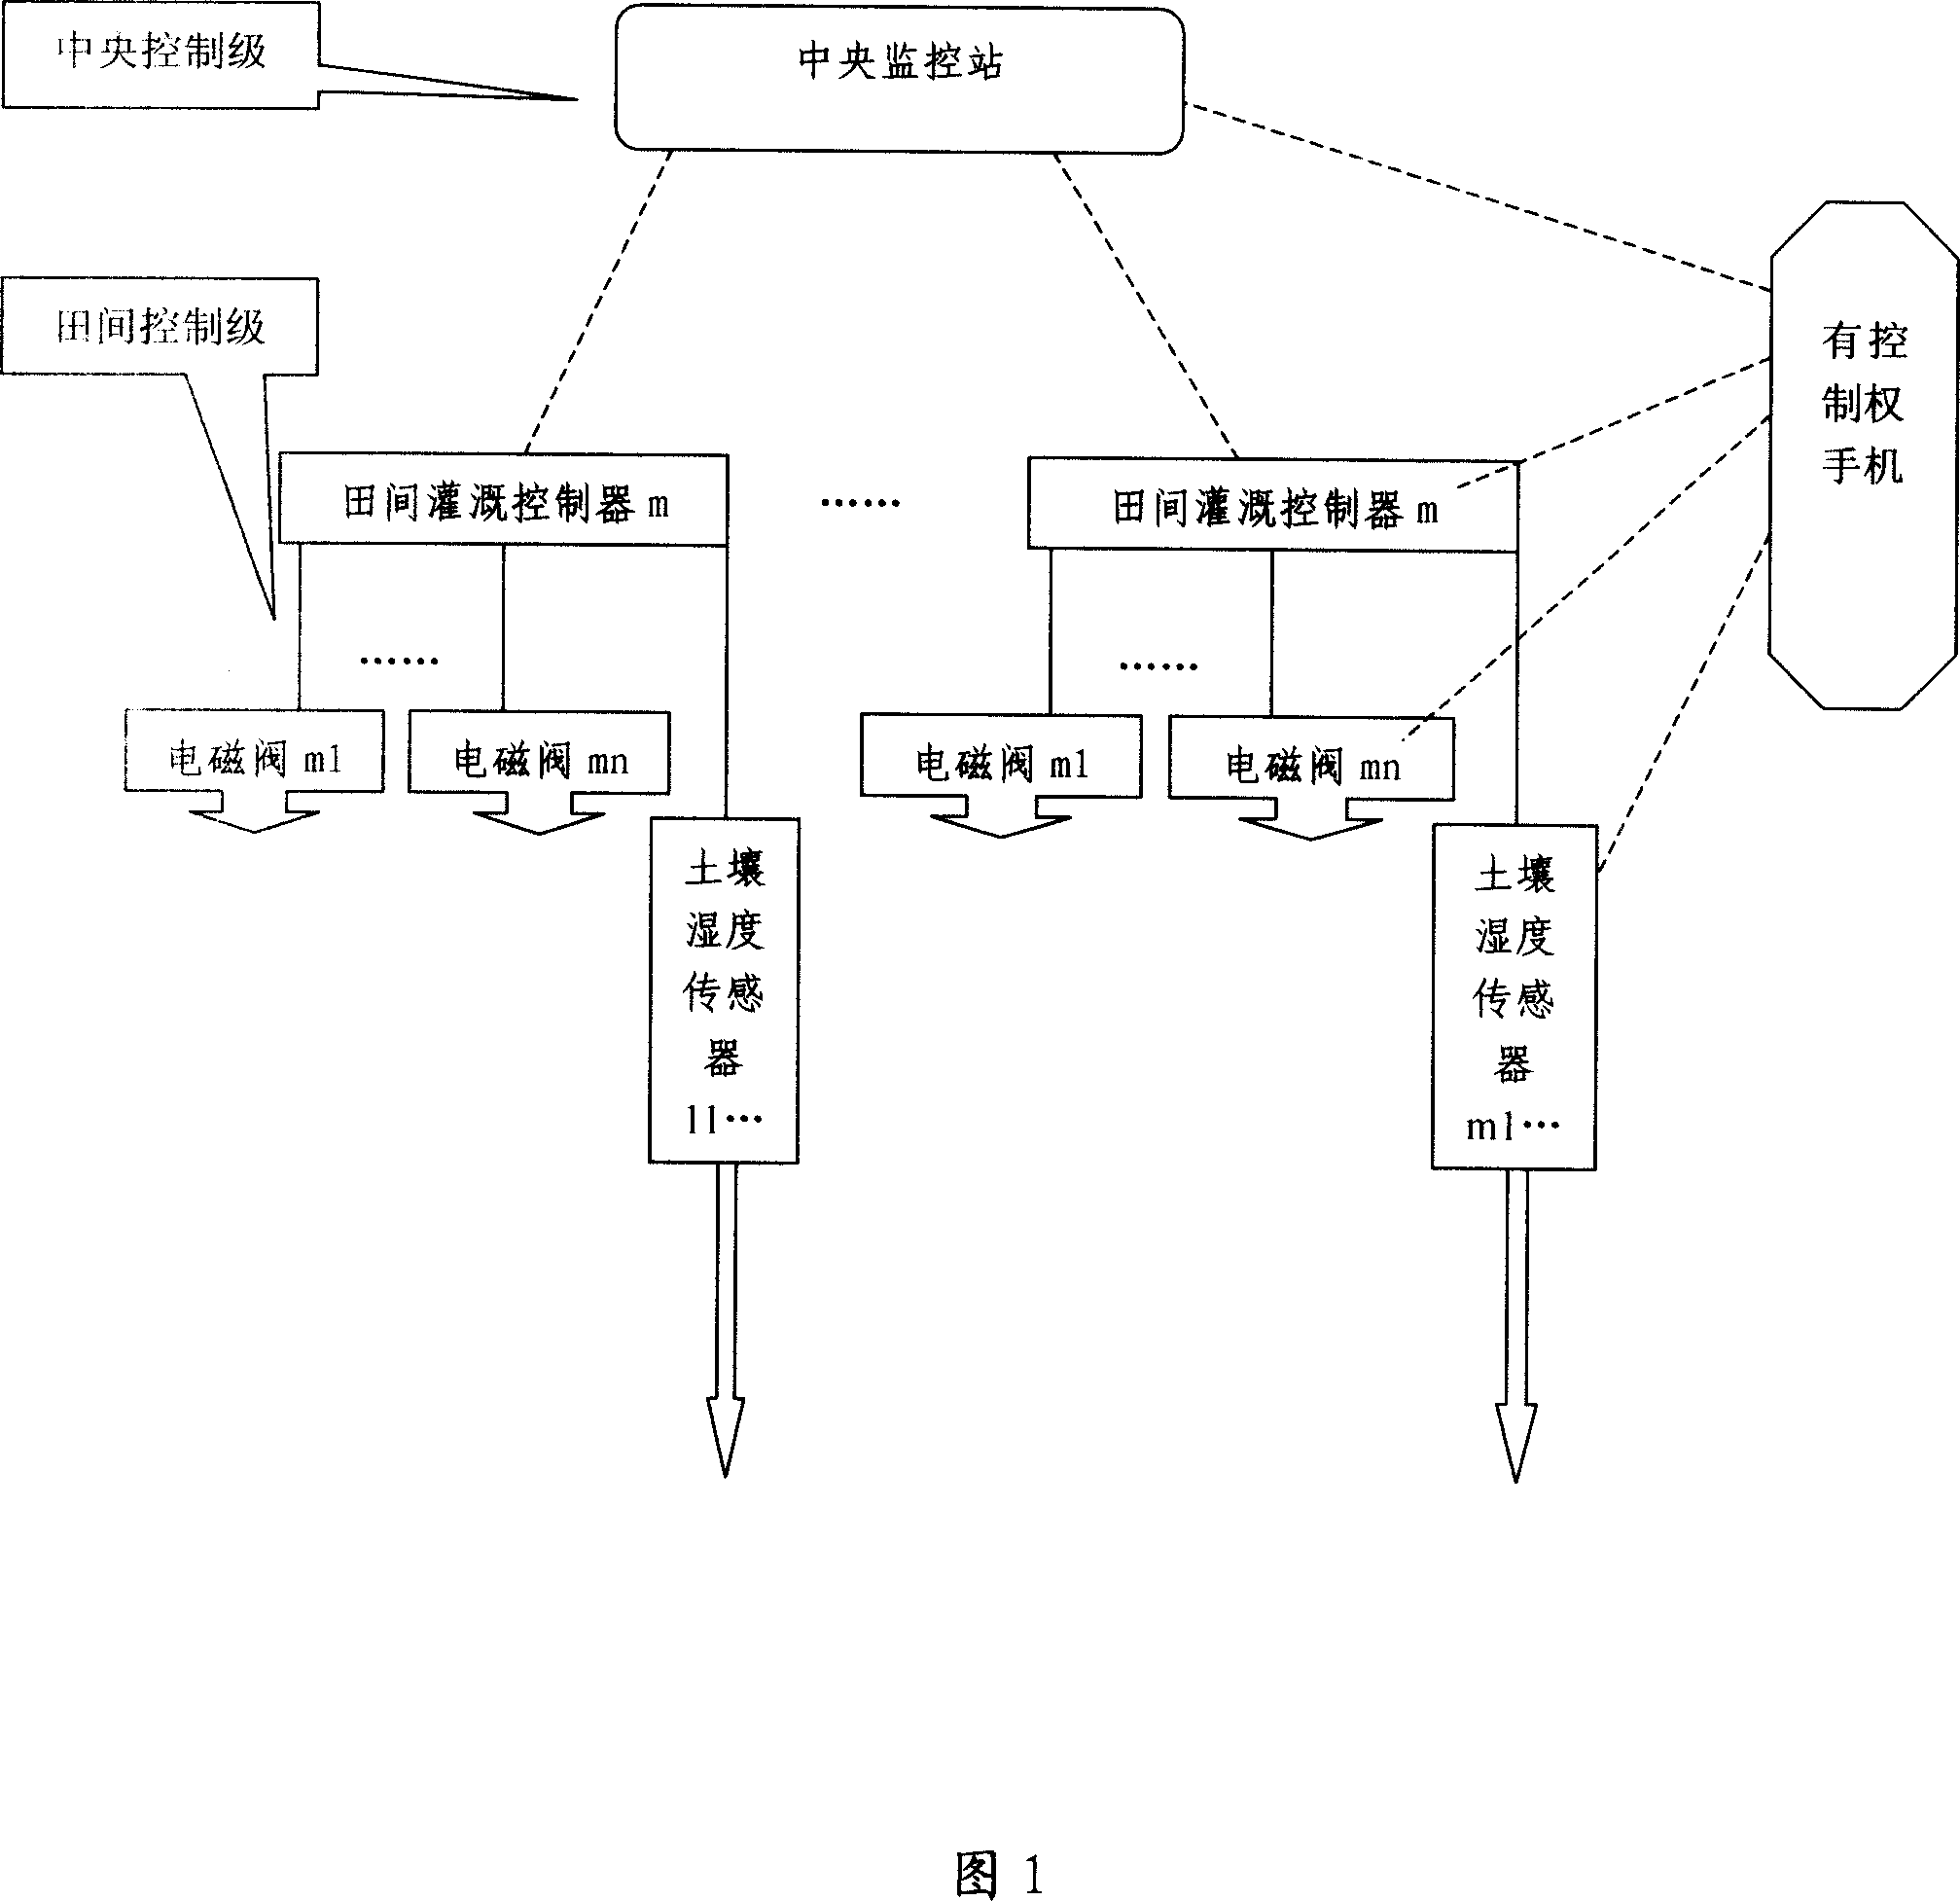 Remote controlled automated irrigation system based on public communication network and control method thereof